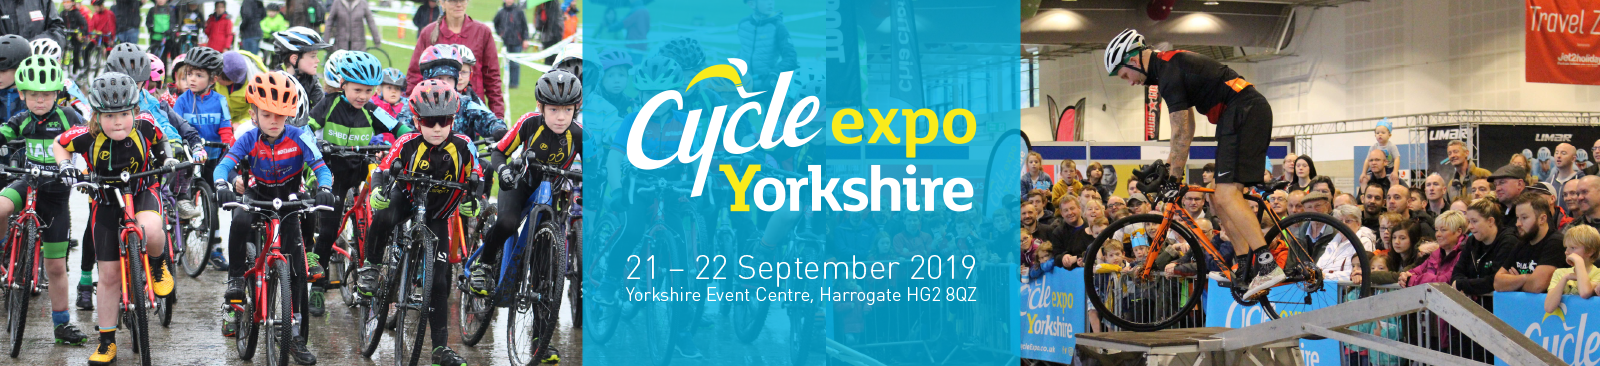 Cycle Expo Yorkshire 2019